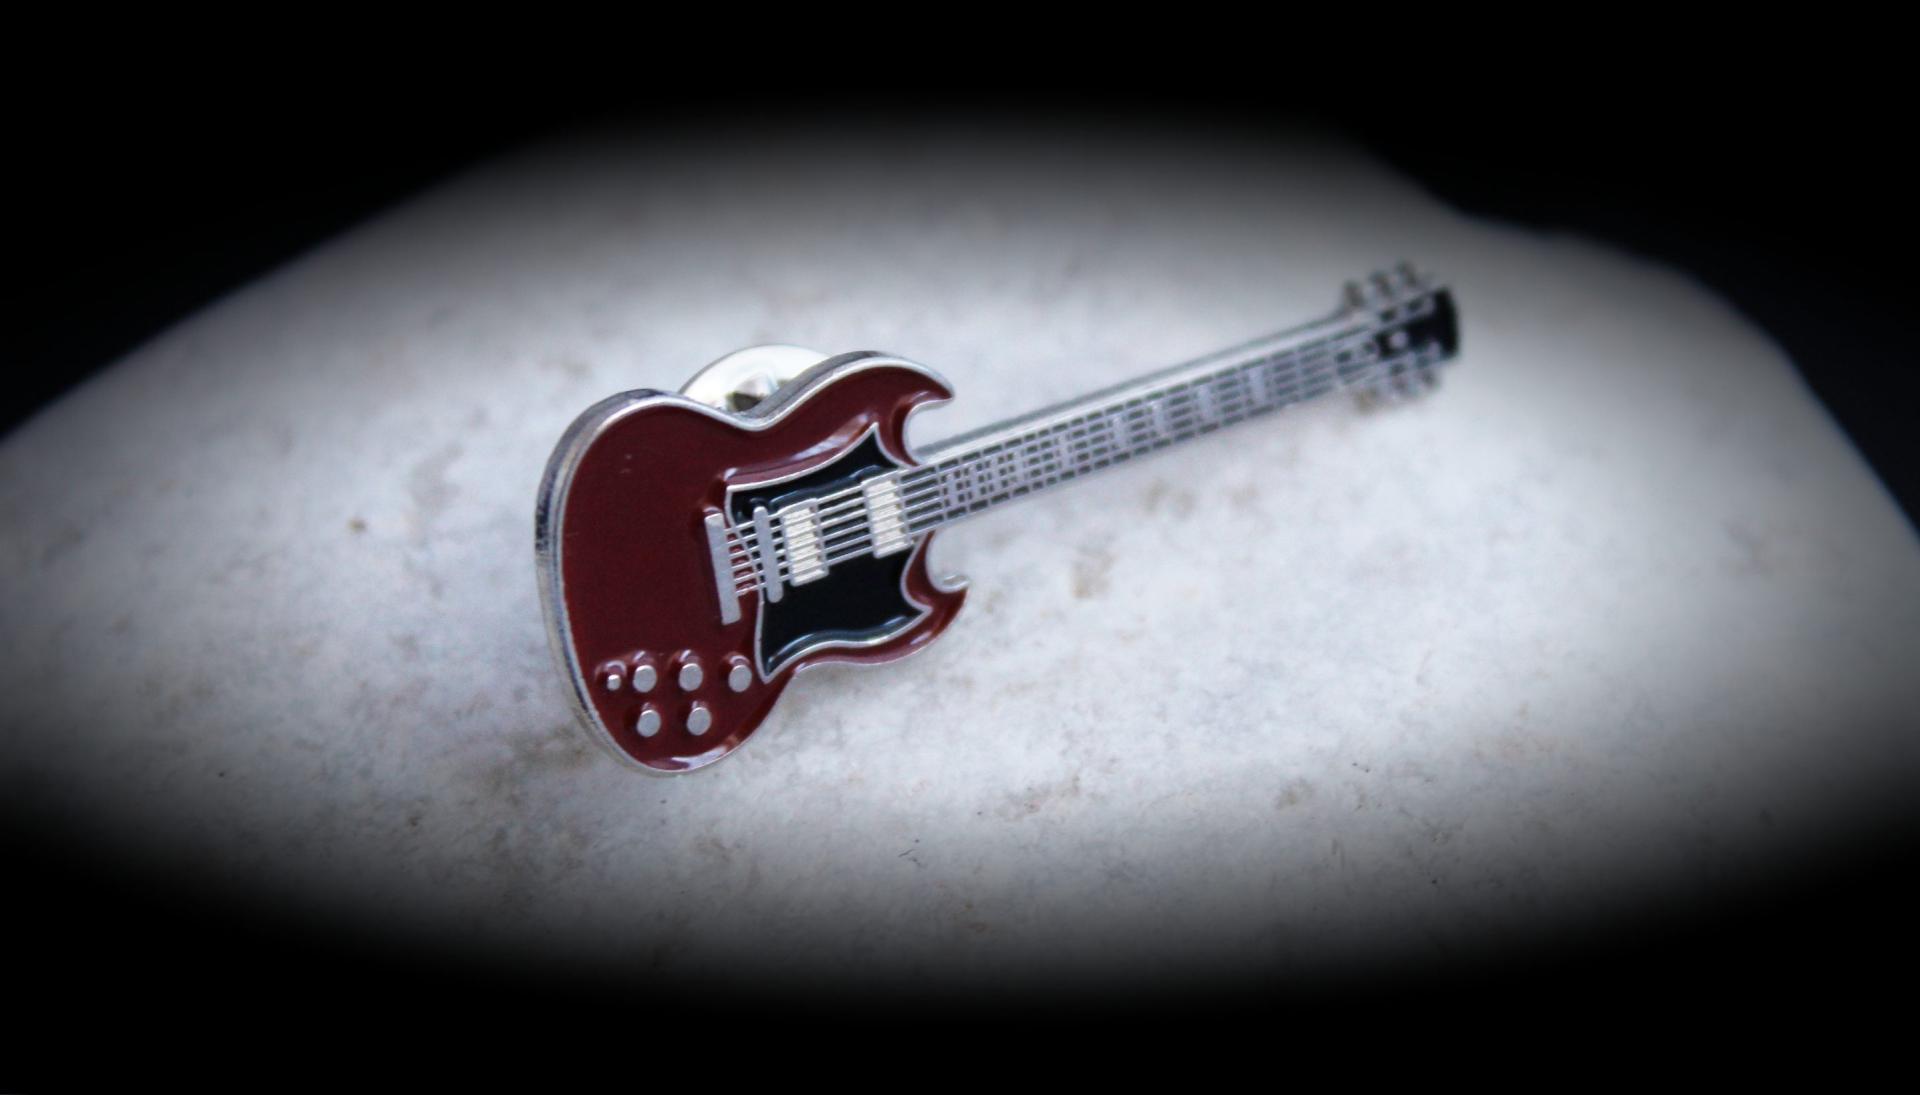 Gibson SG Style Guitar Pin Badge - Heritage Cherry Colour